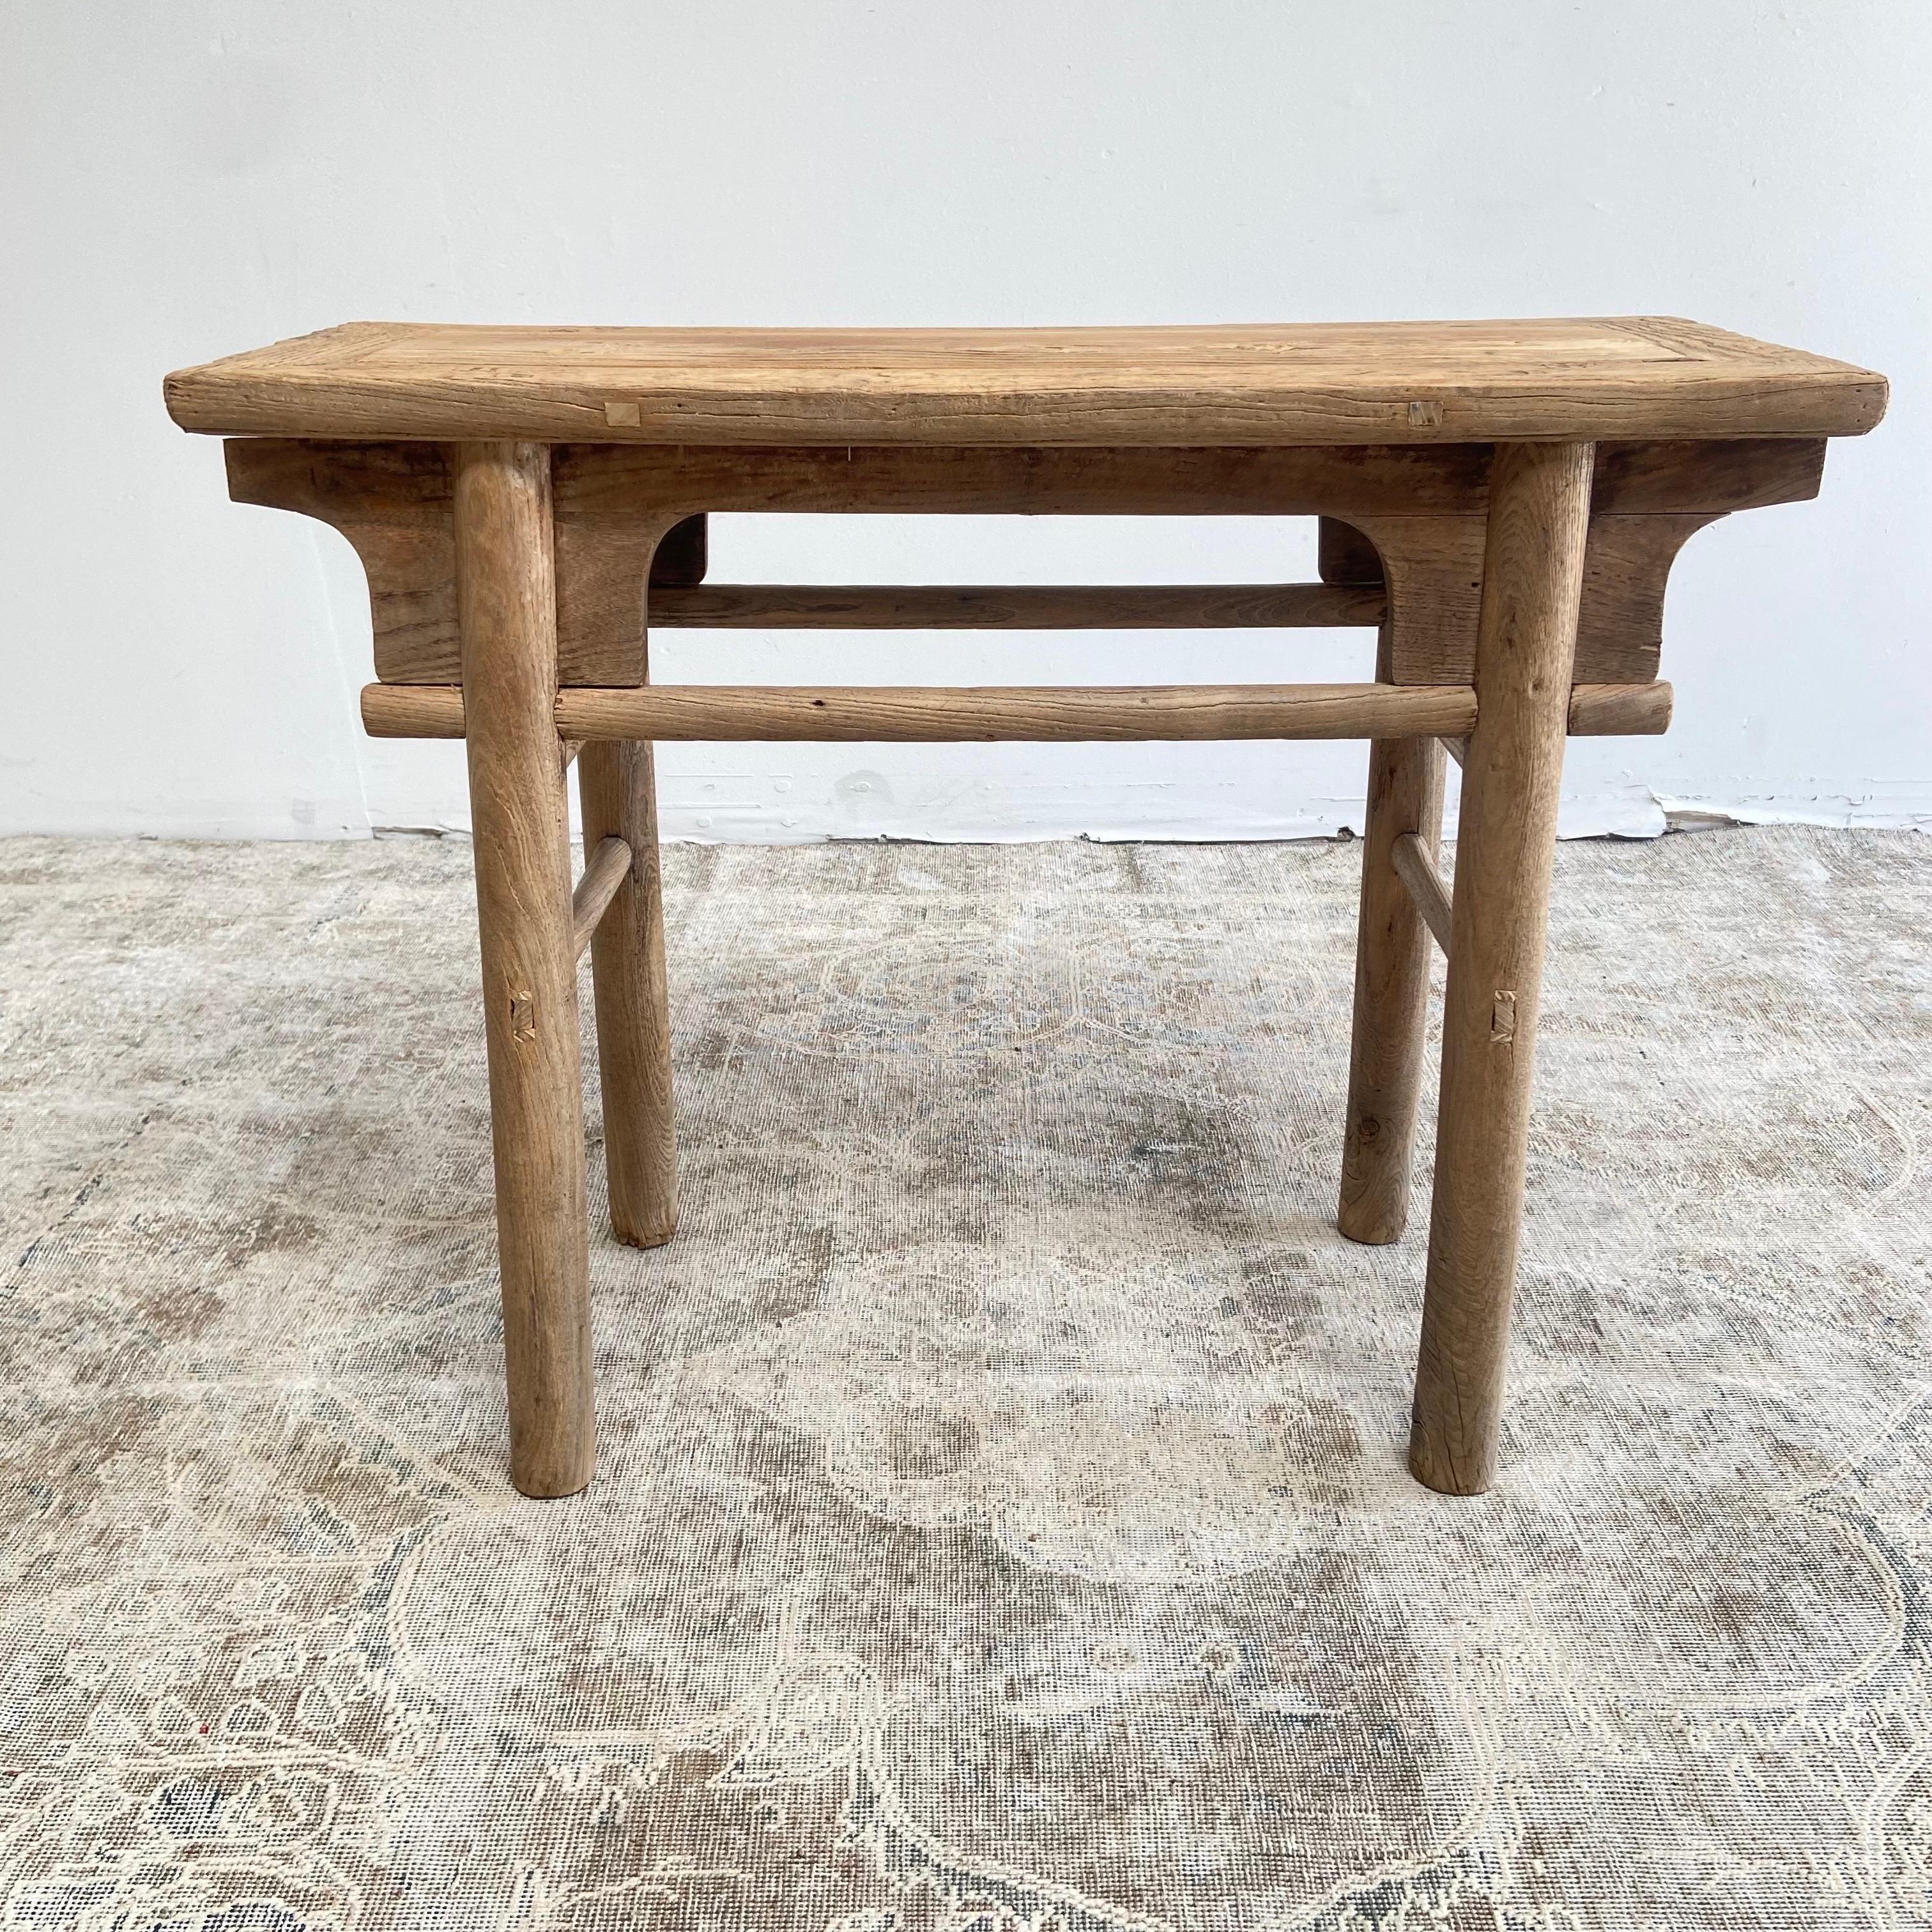 Vintage Antique Elm wood console table
Beautiful antique patina, with weathering and age, these are solid and sturdy ready for daily use, use as a entry table, sofa table or console in a dining room. 
Great in a living room with baskets or